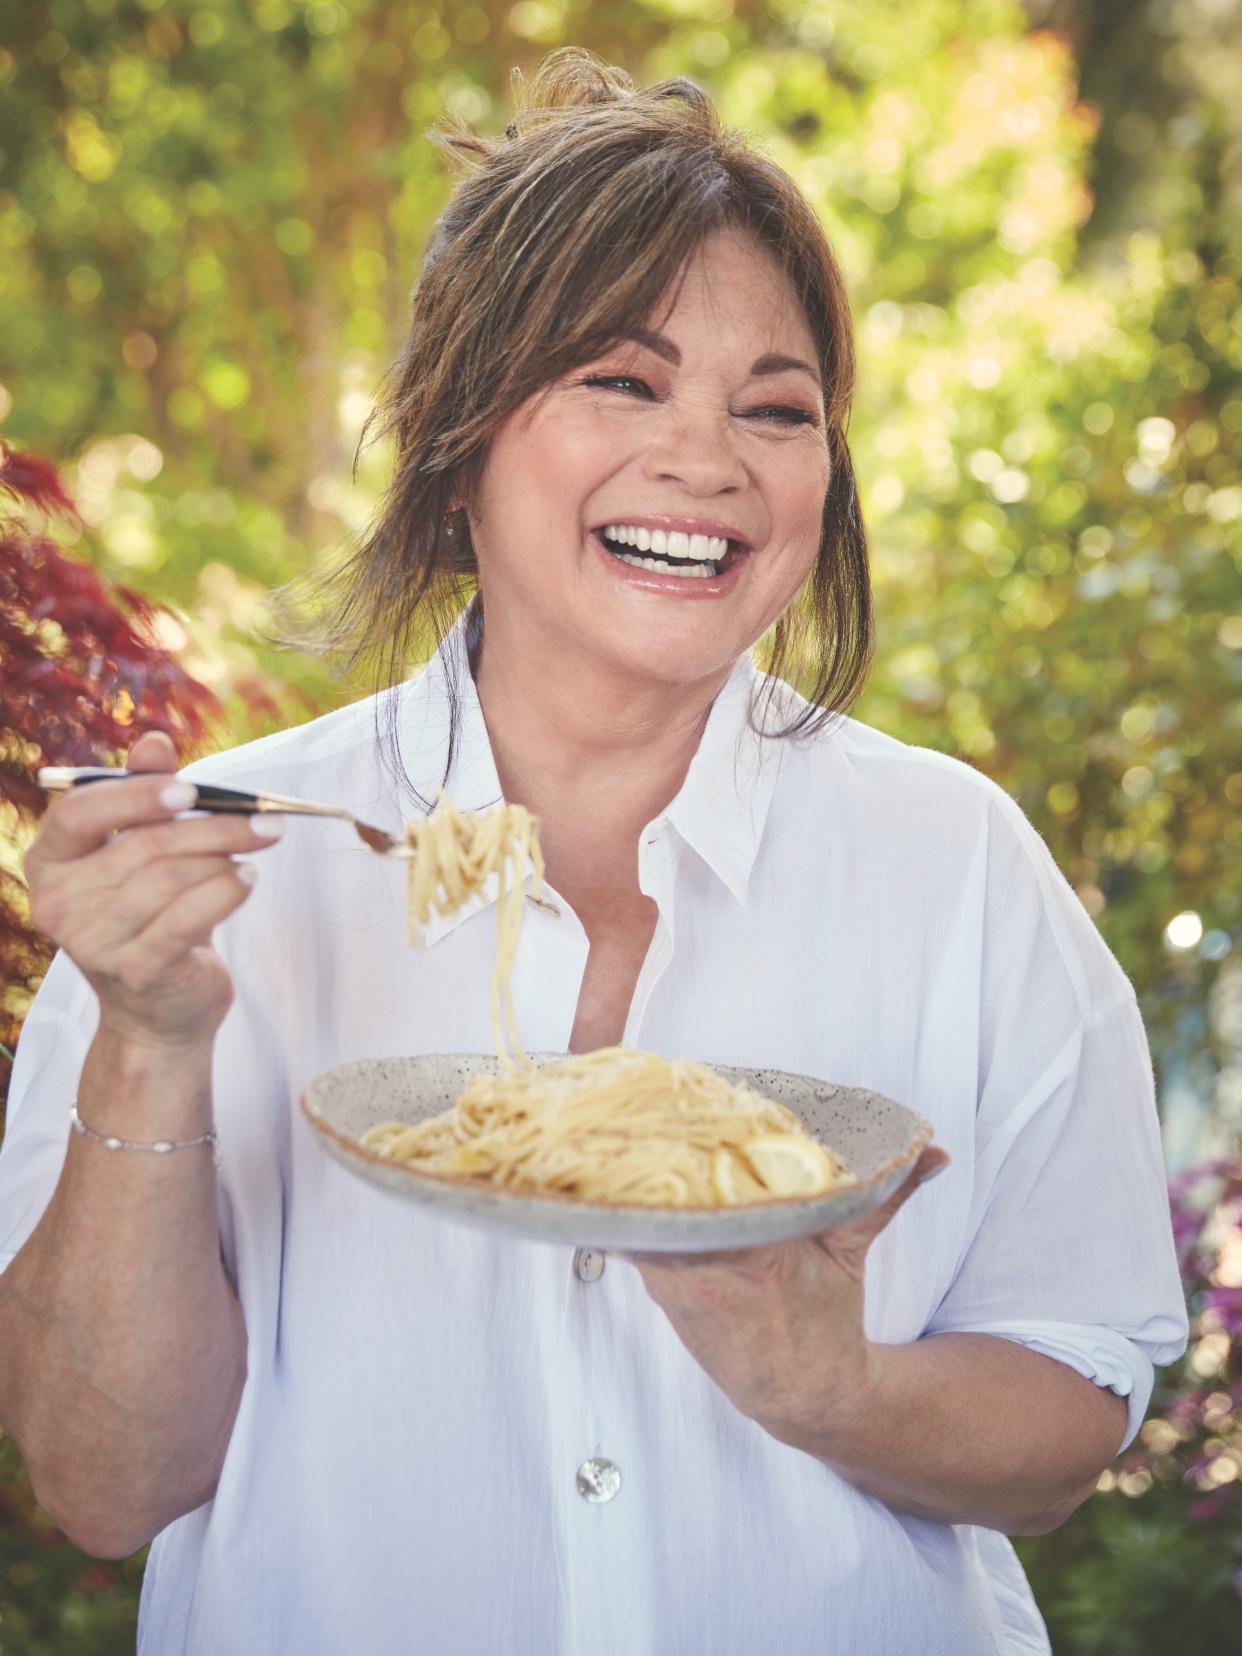 Valerie Bertinelli  holding a plate of pasta with one hand and a forkful of it in the other.